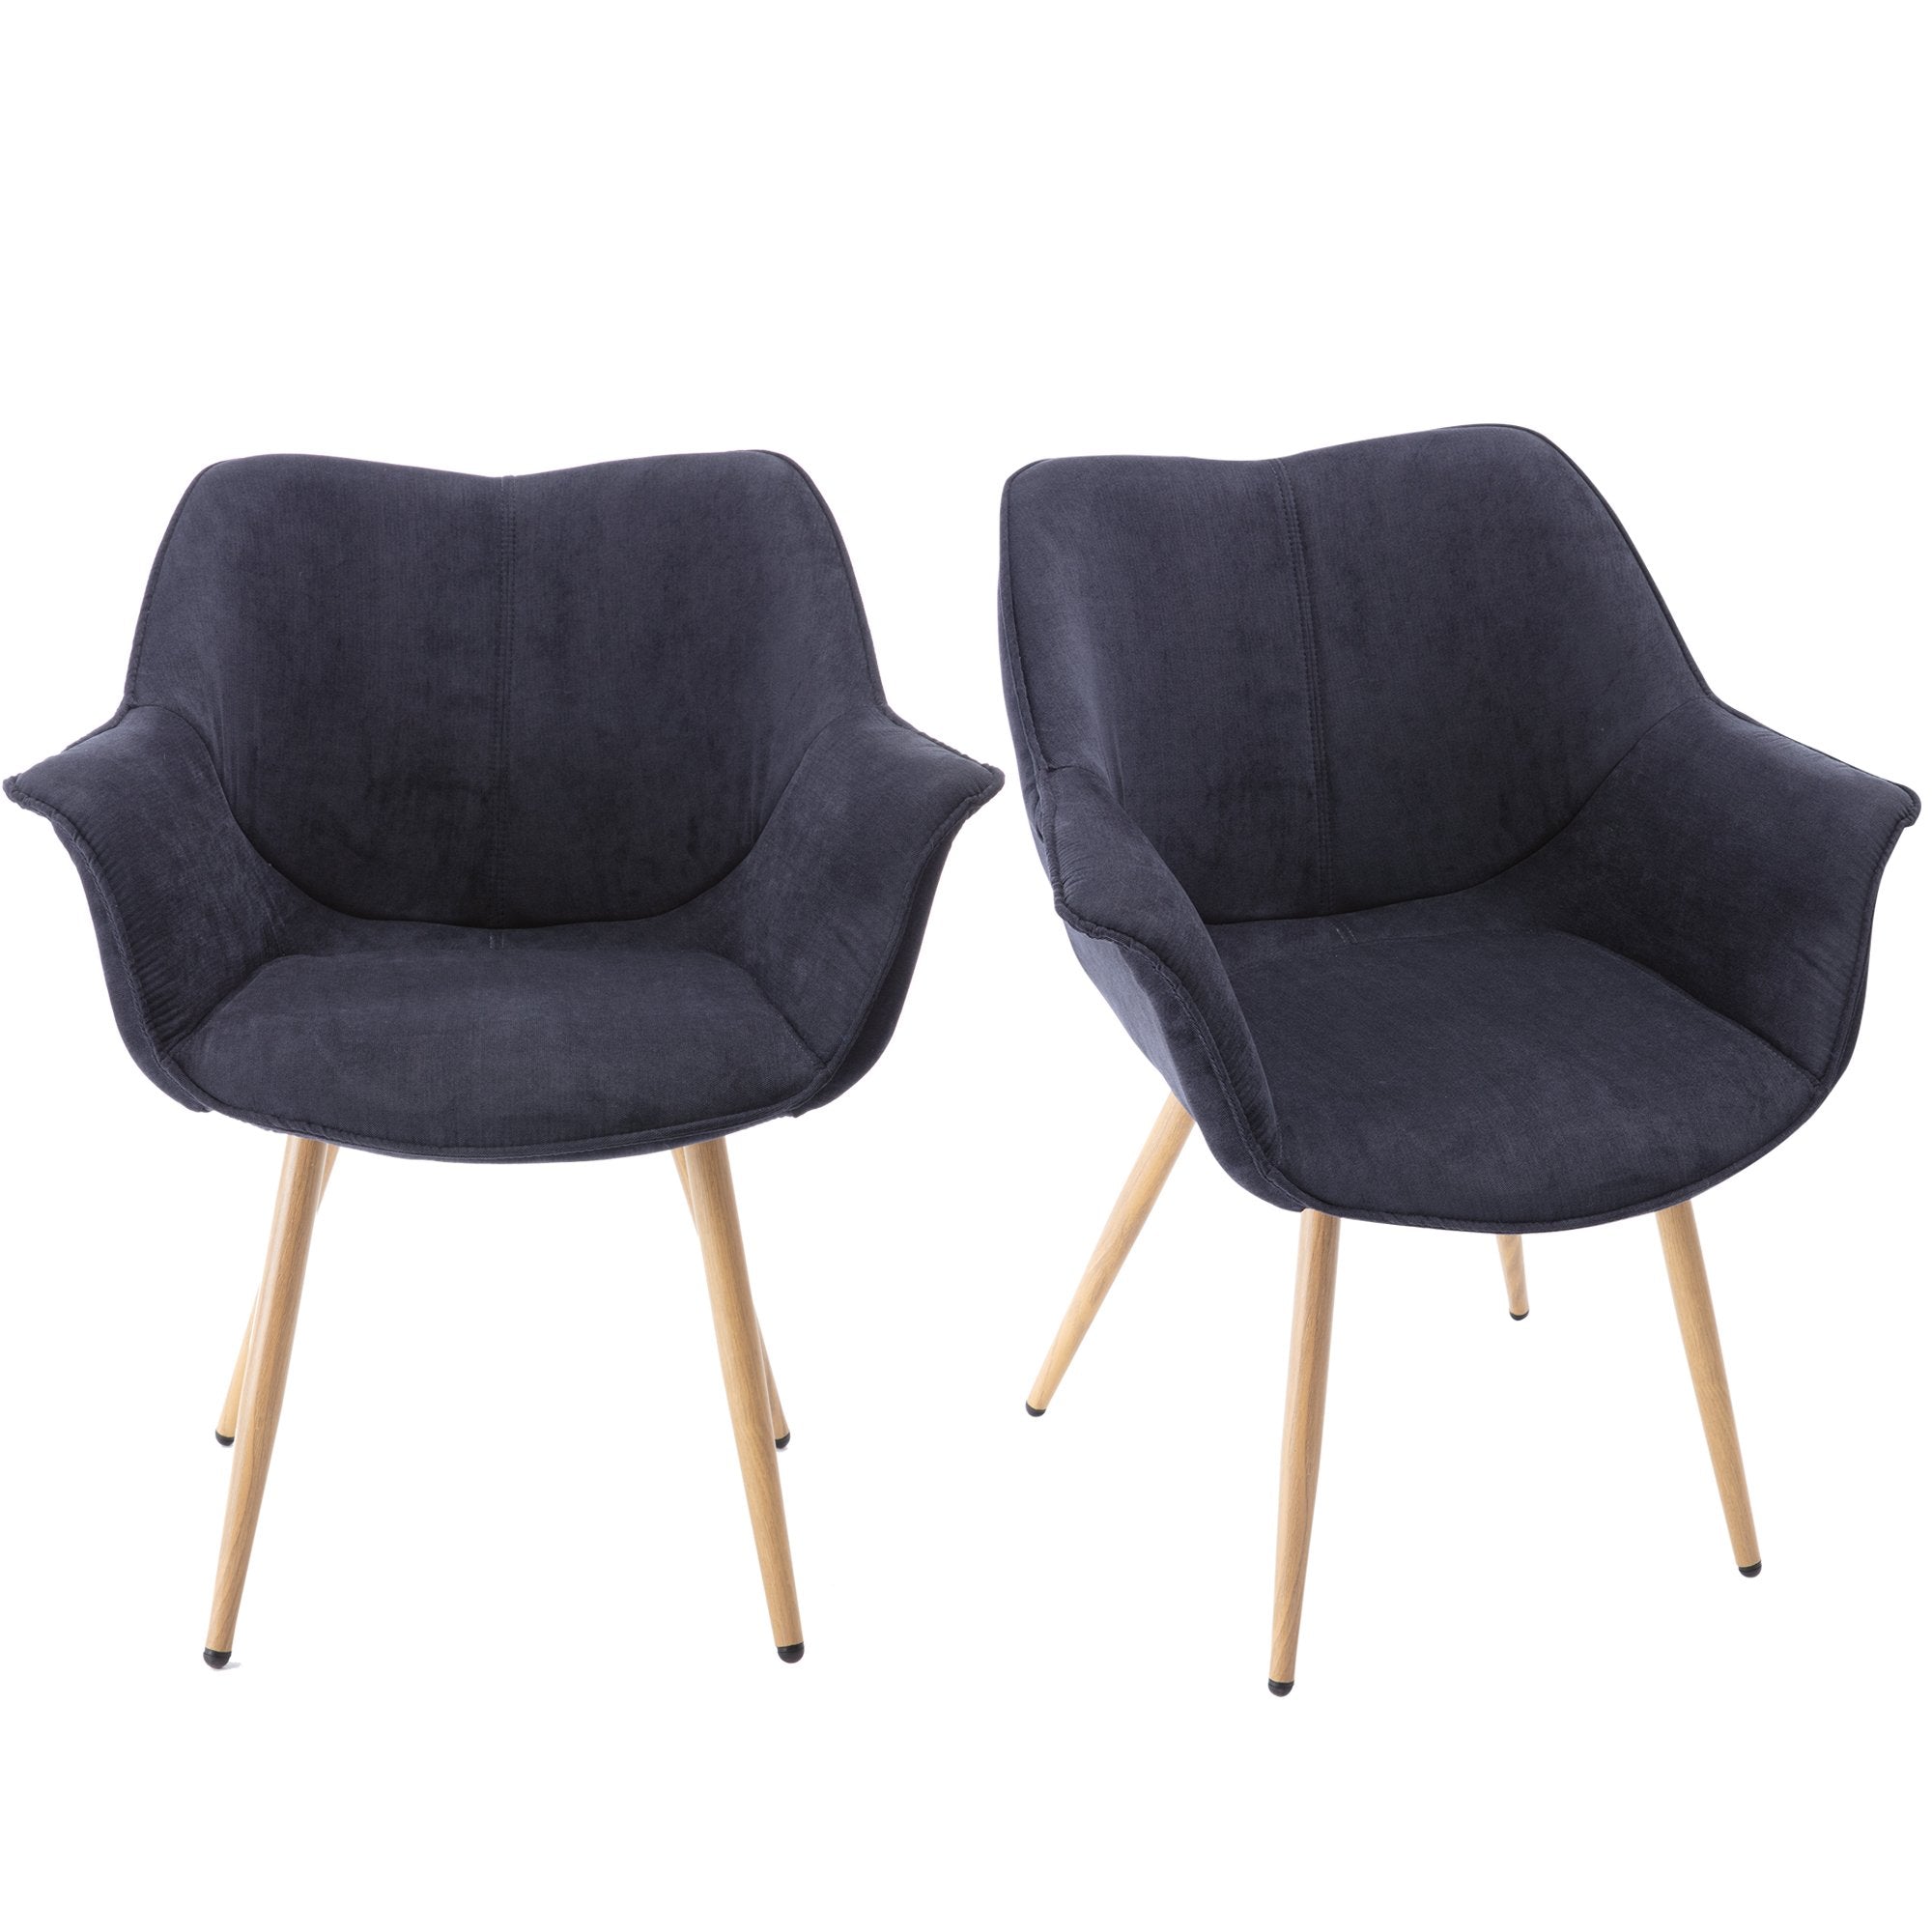 Dining Chairs, Modern style Upholstered fabric Chairs Leisure Side Chairs with Metal Legs ( Set of 2/ Navy Blue)-Boyel Living